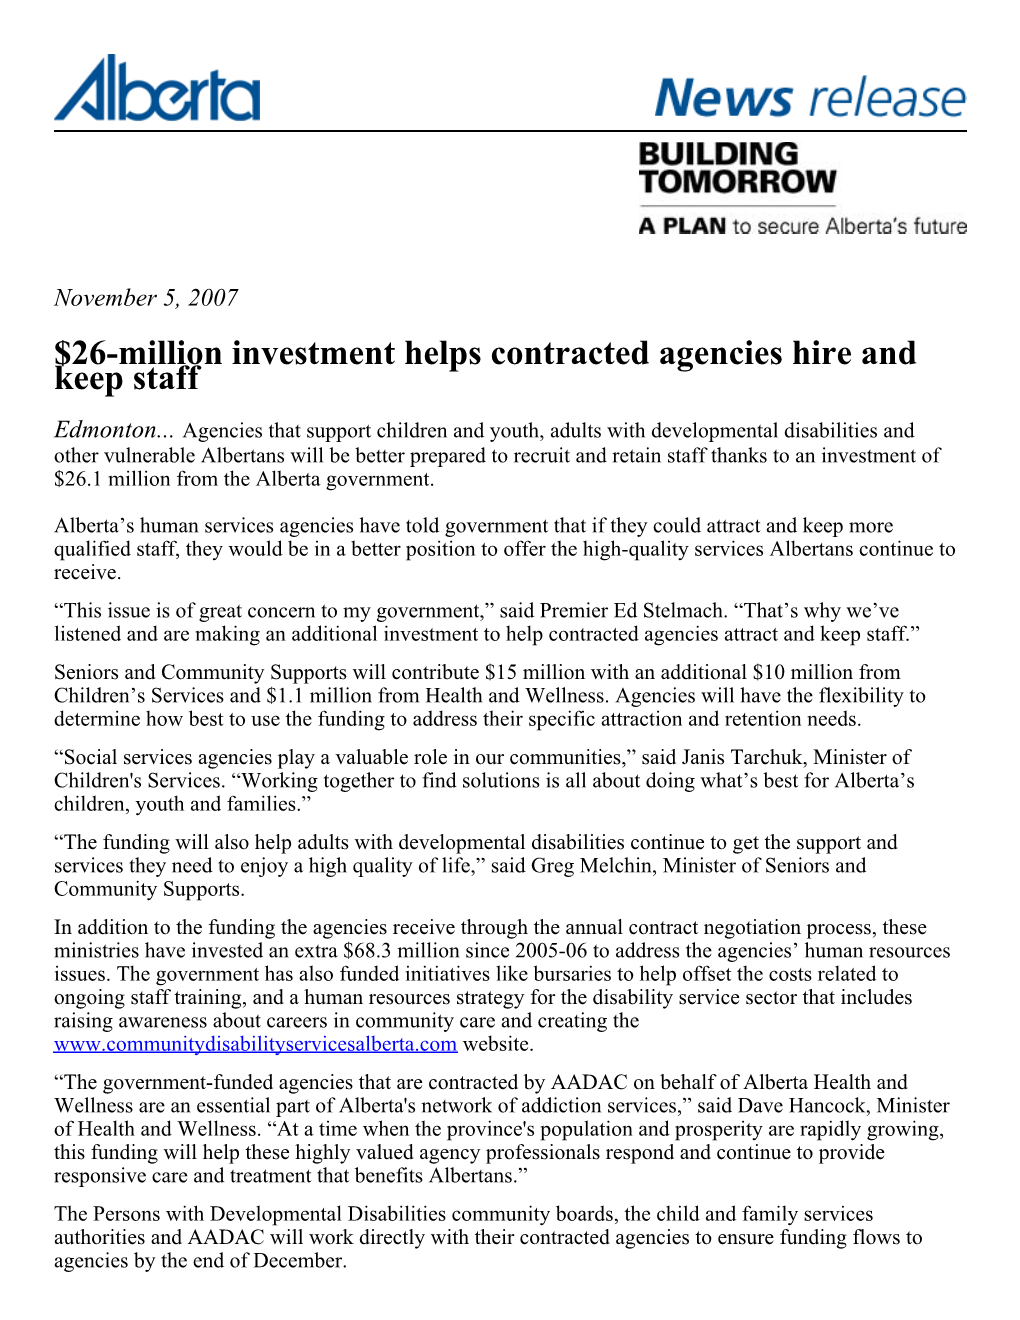 26-Million Investment Helps Contracted Agencies Hire and Keep Staff